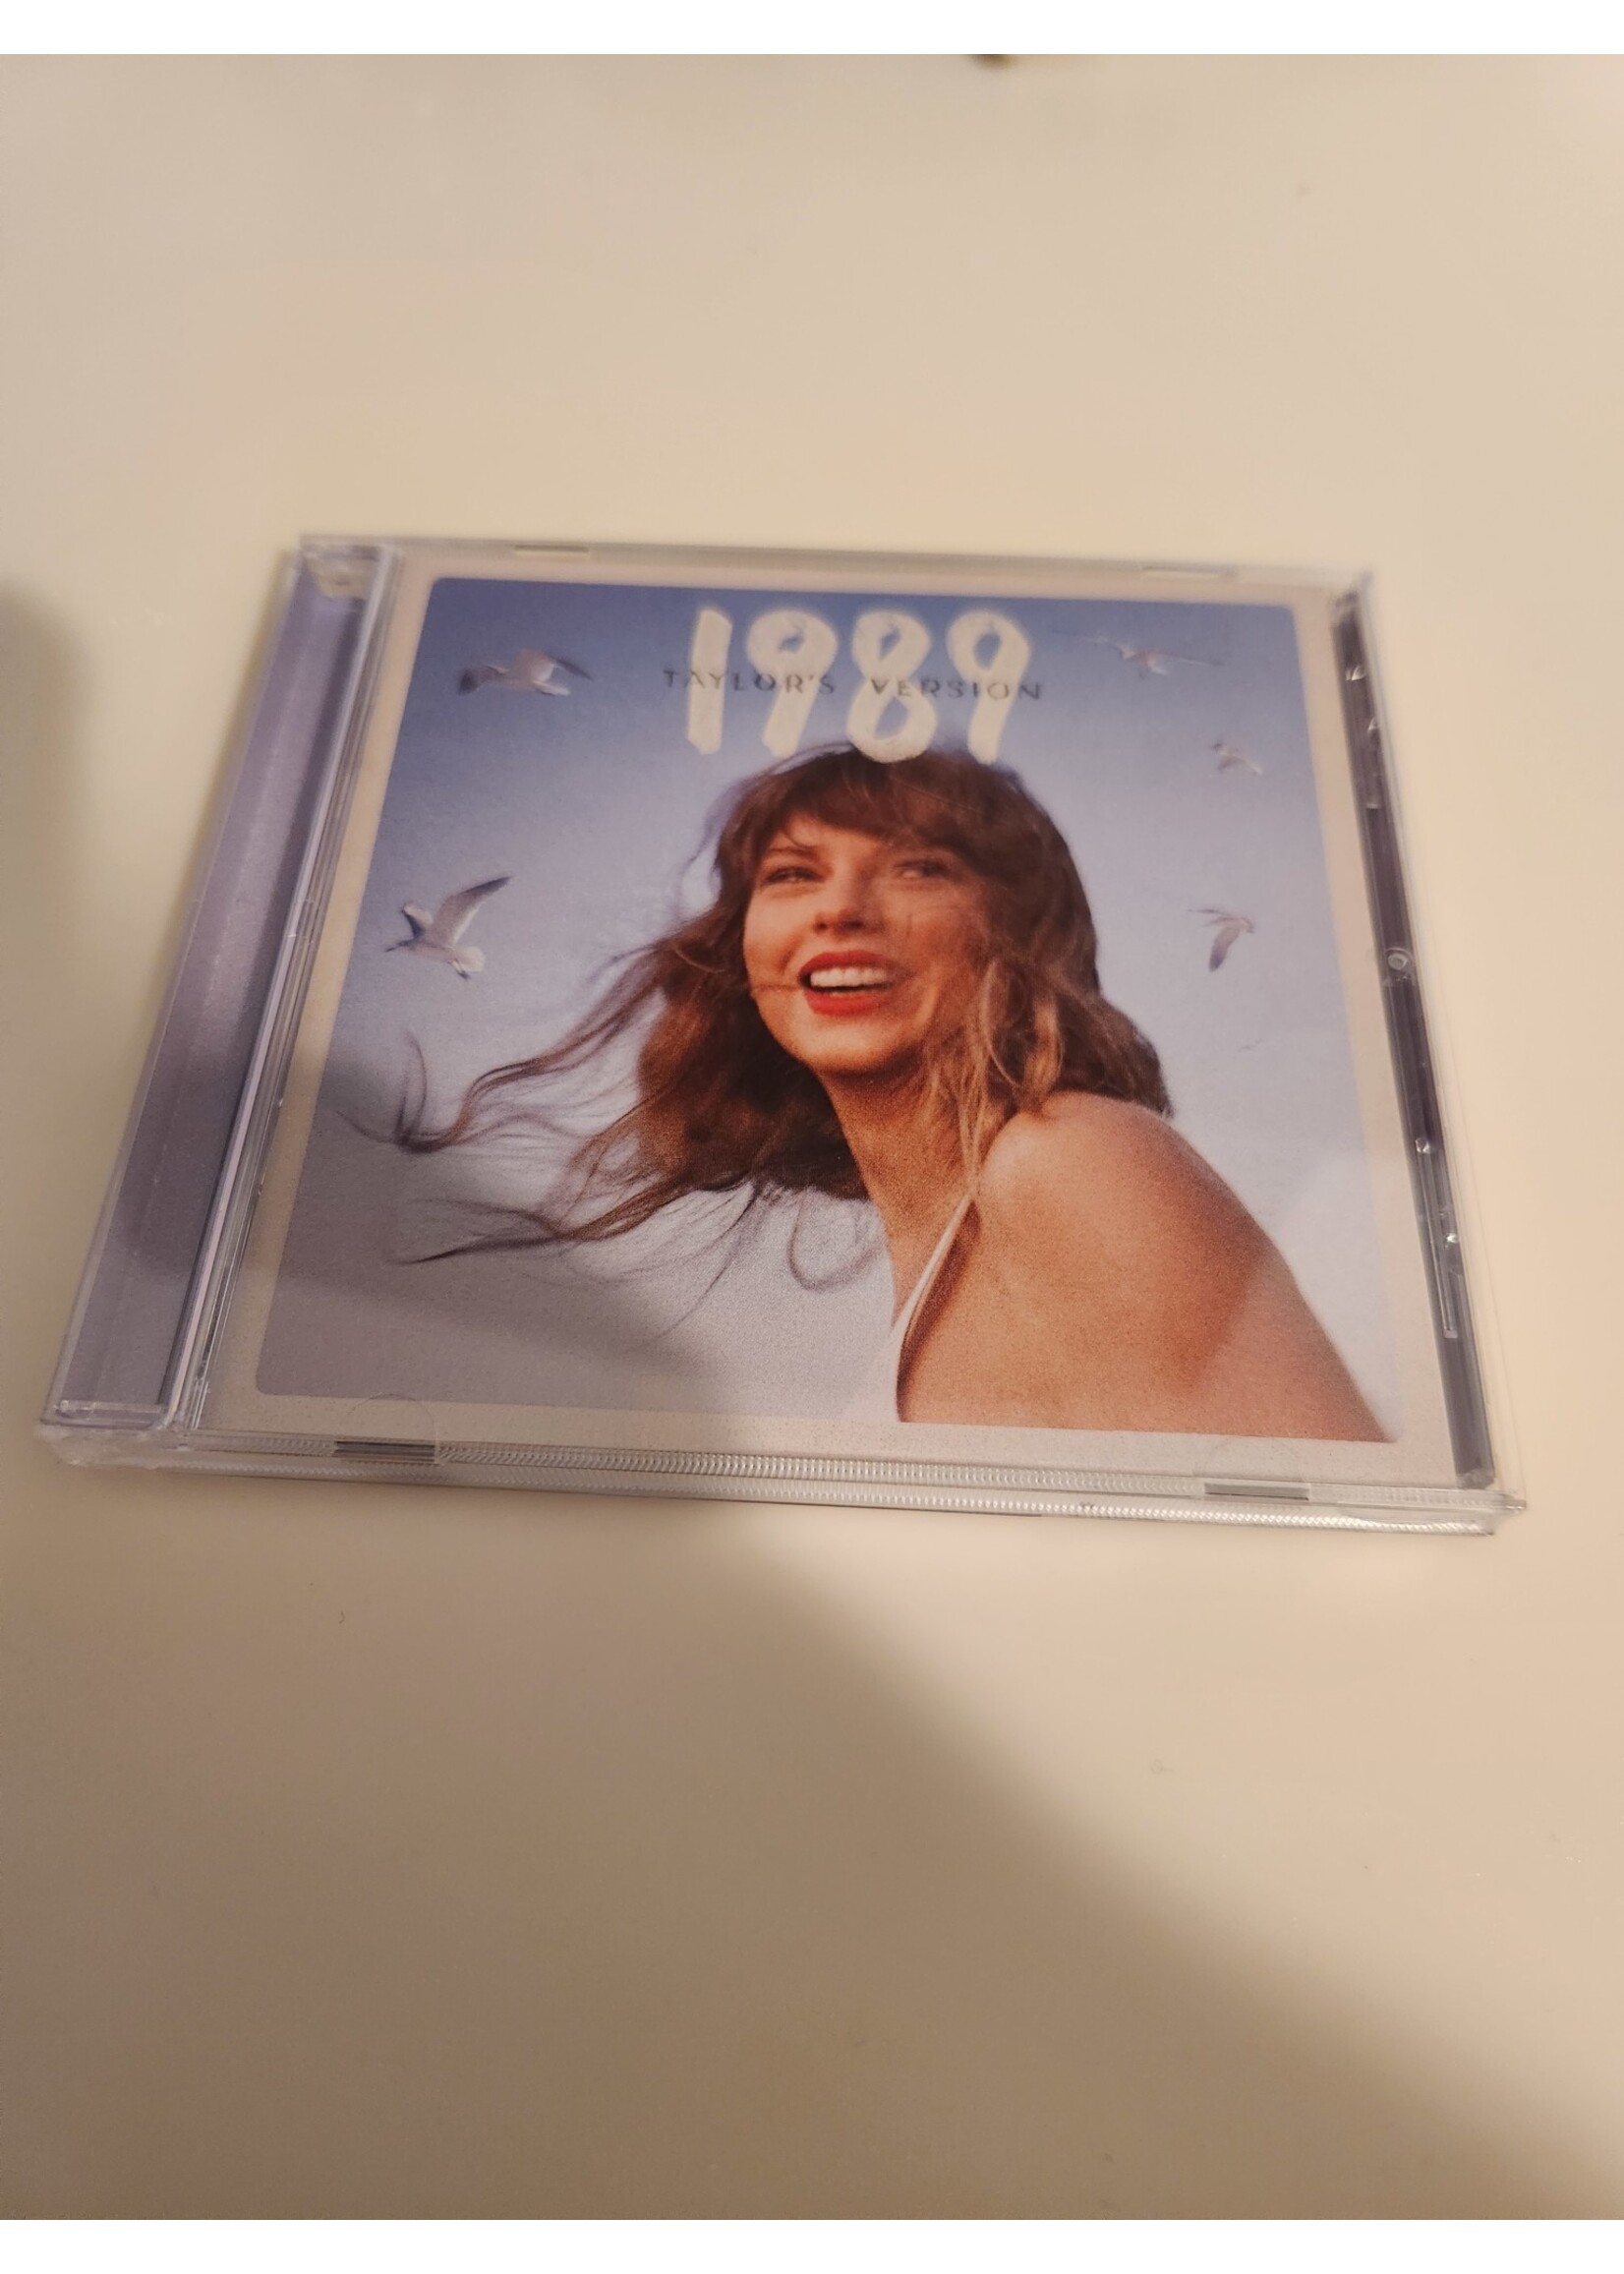 *Open* Taylor Swift - 1989 (Taylor's Version) CD Crystal Skies Blue Deluxe Poster Edition (Target Exclusive)